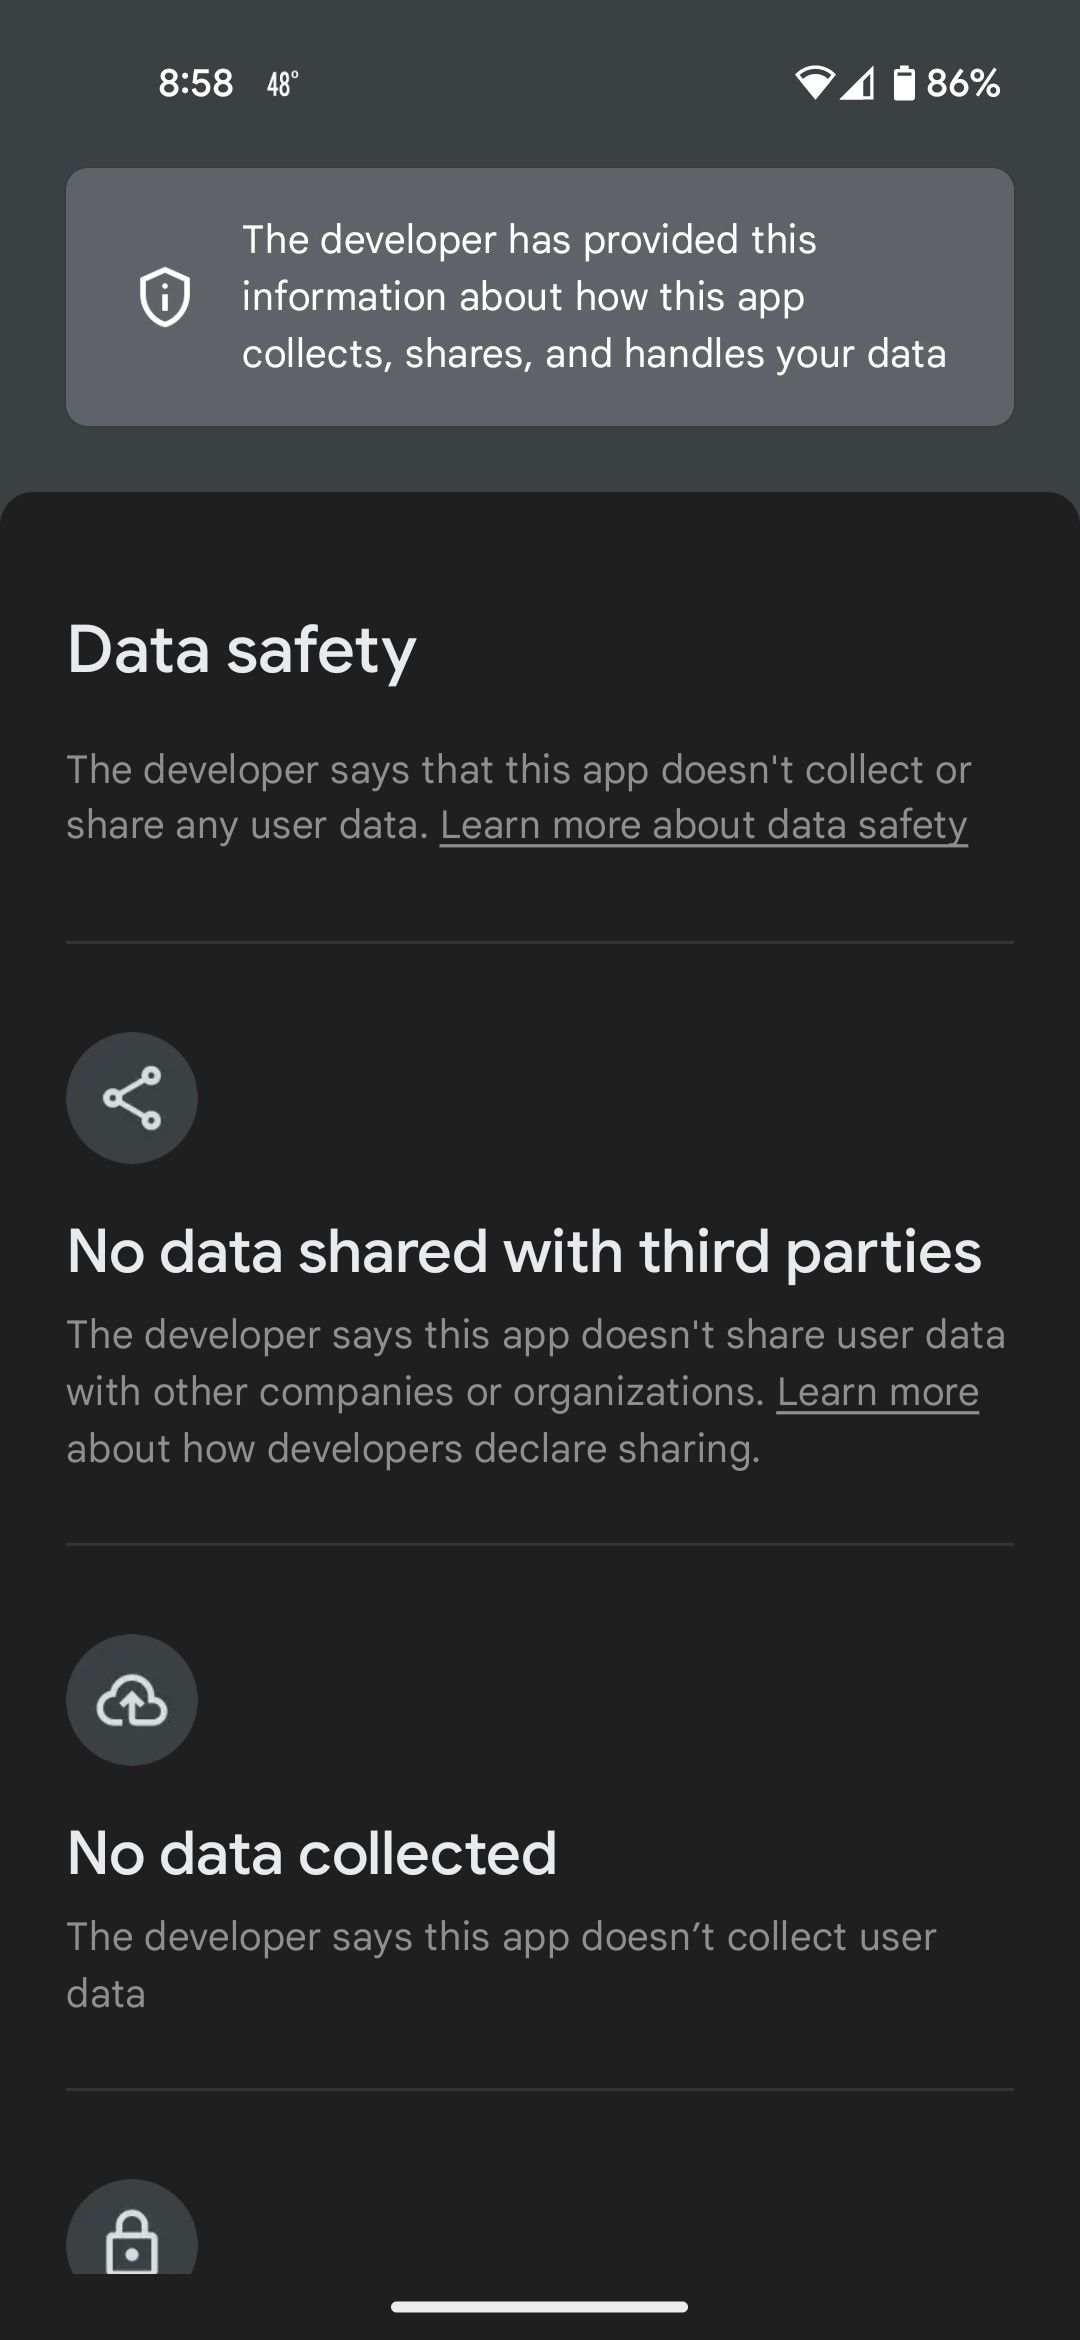 The data safety section of an app's page on Google Play